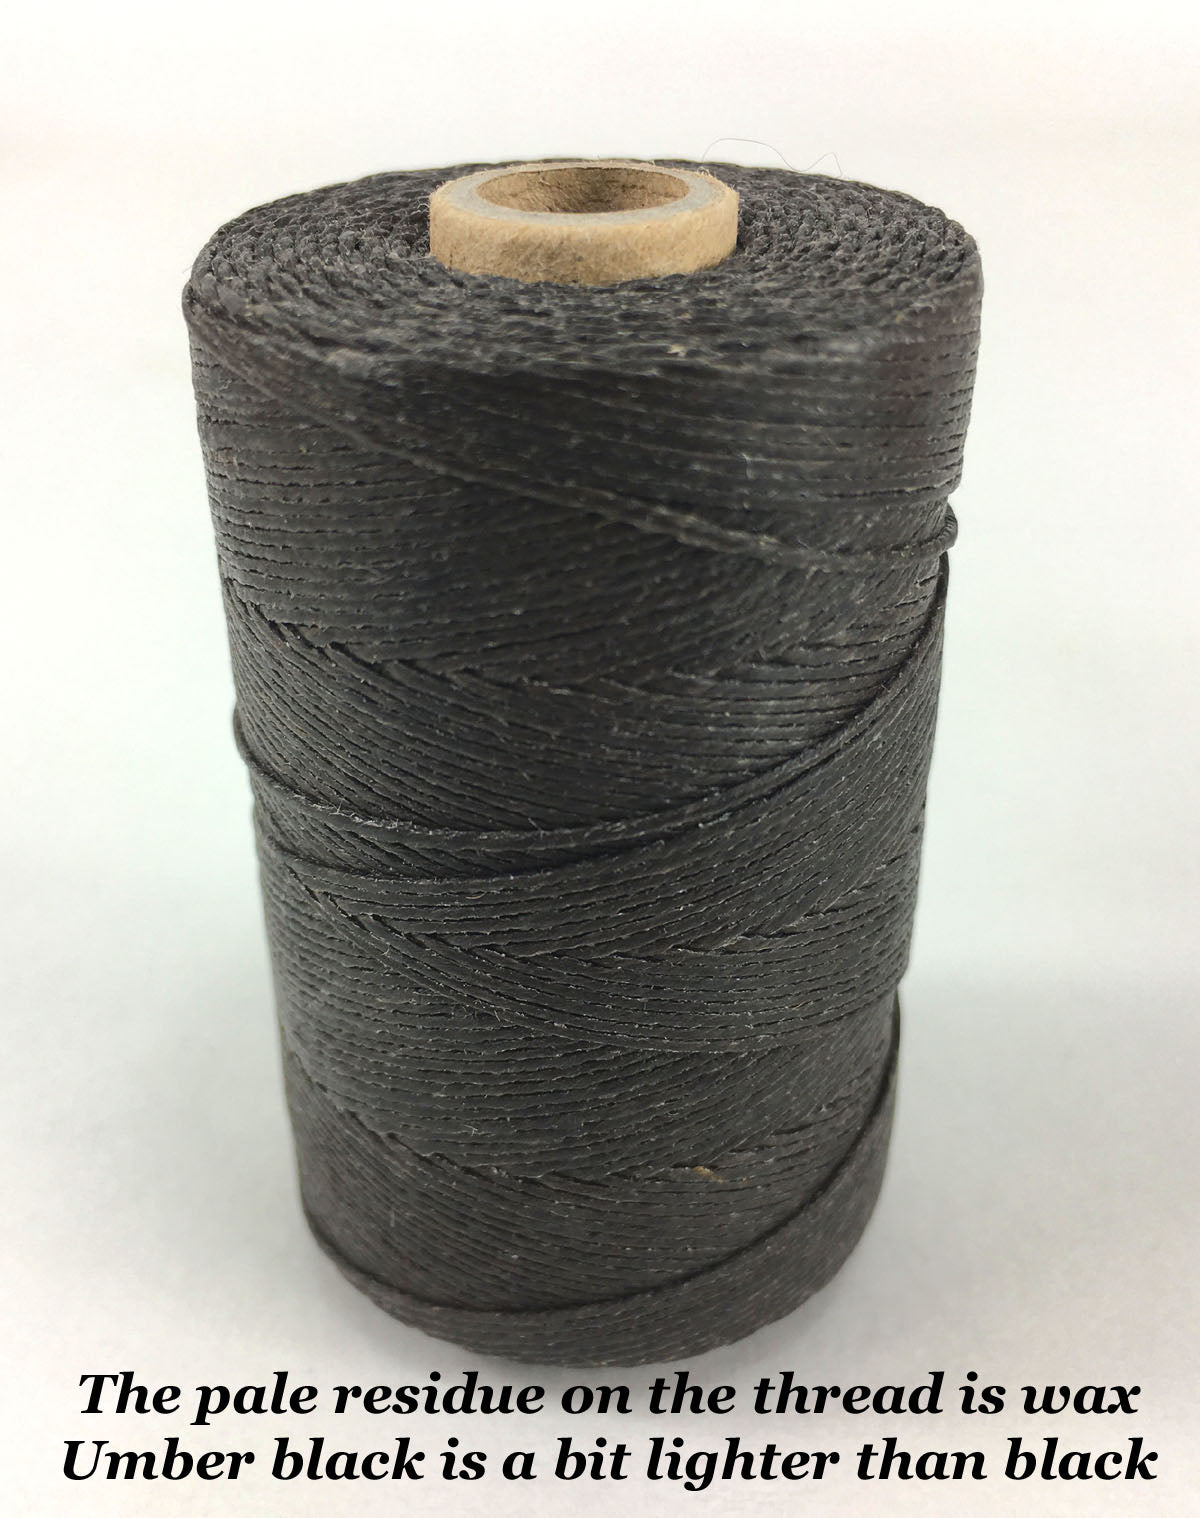 Umber Black- Per spool 50g- 100% Pure Linen Thread- Waxed- 18/3 No.18 Cord 3- Approx 0.55mm thick